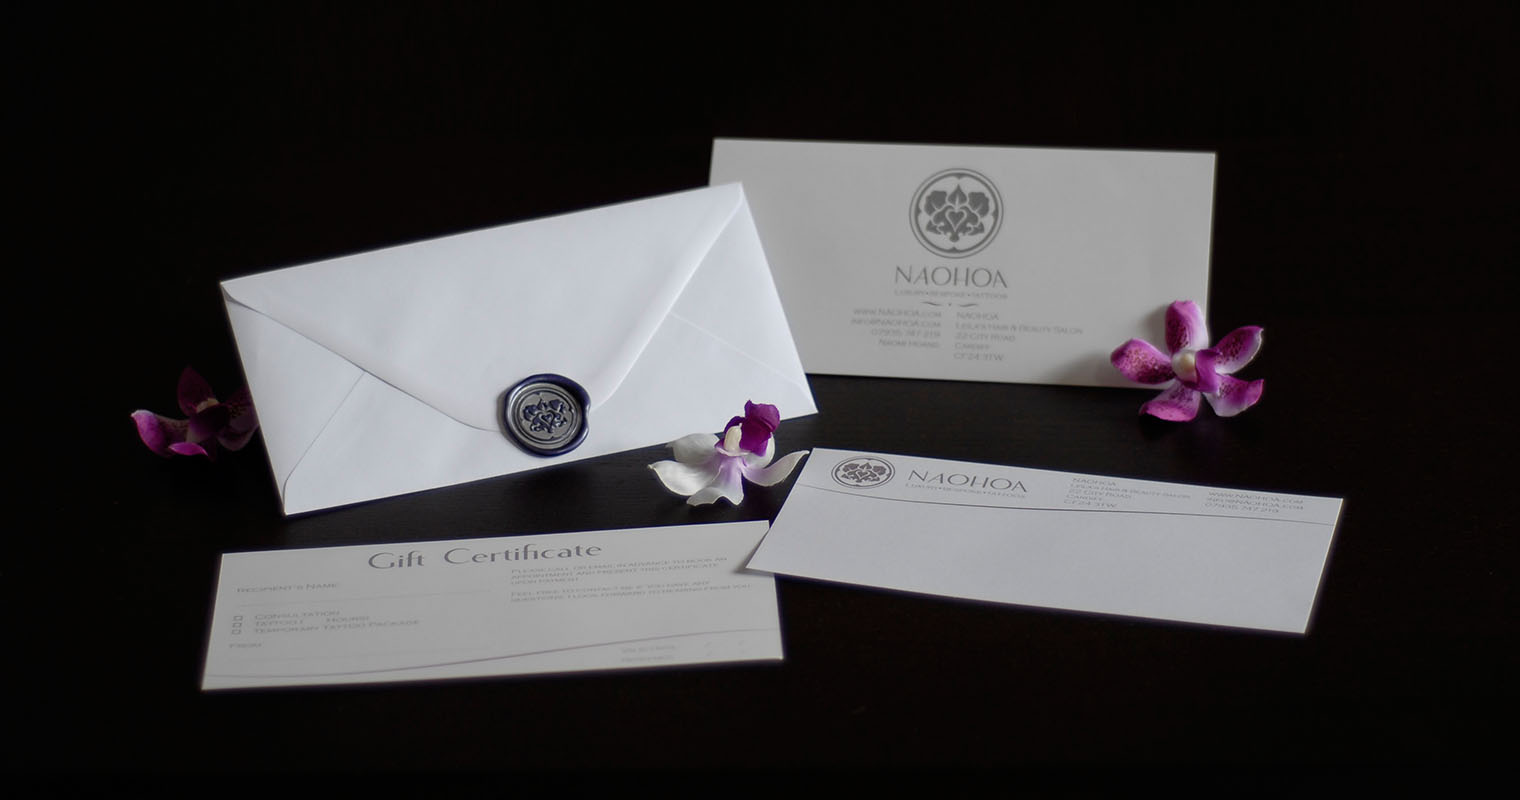 Gift Certificates with a hand-made wax seal